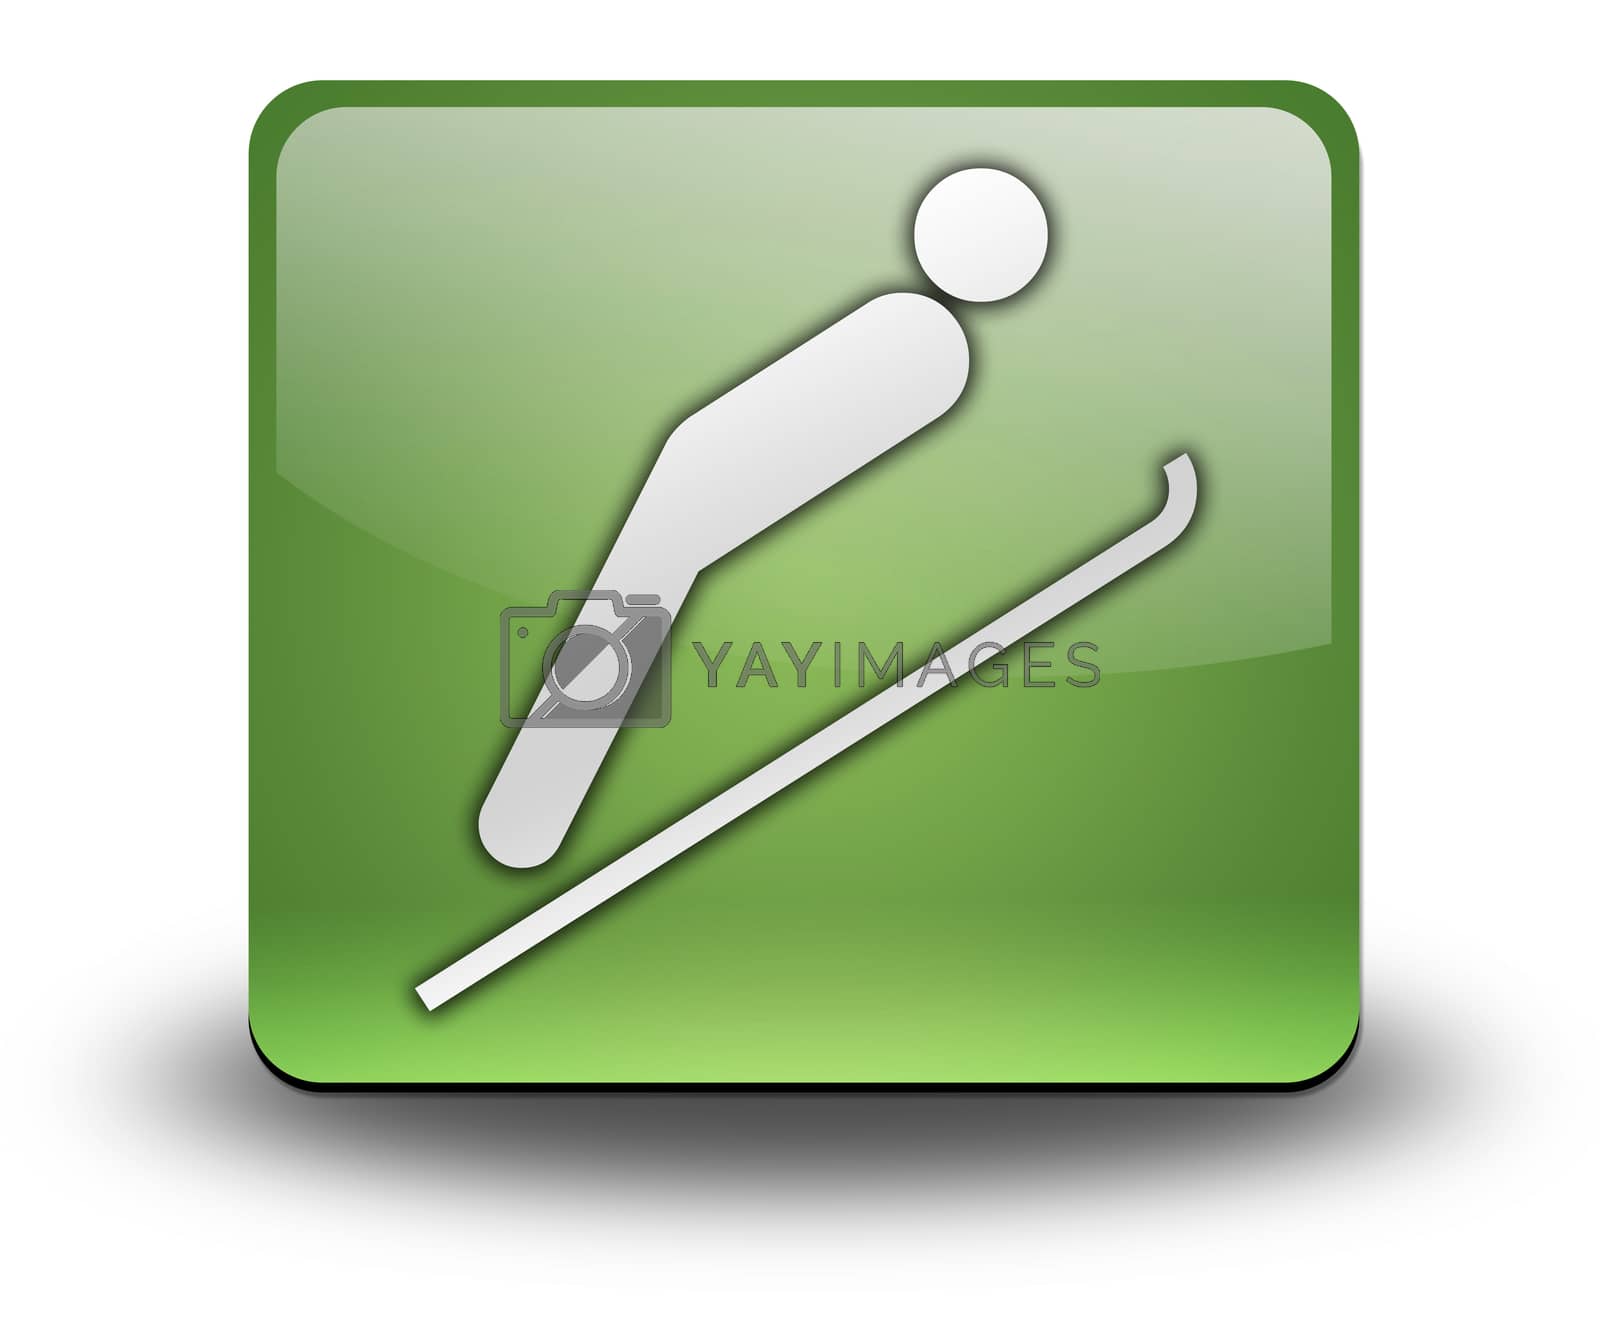 Royalty free image of Icon, Button, Pictogram Ski Jumping by mindscanner